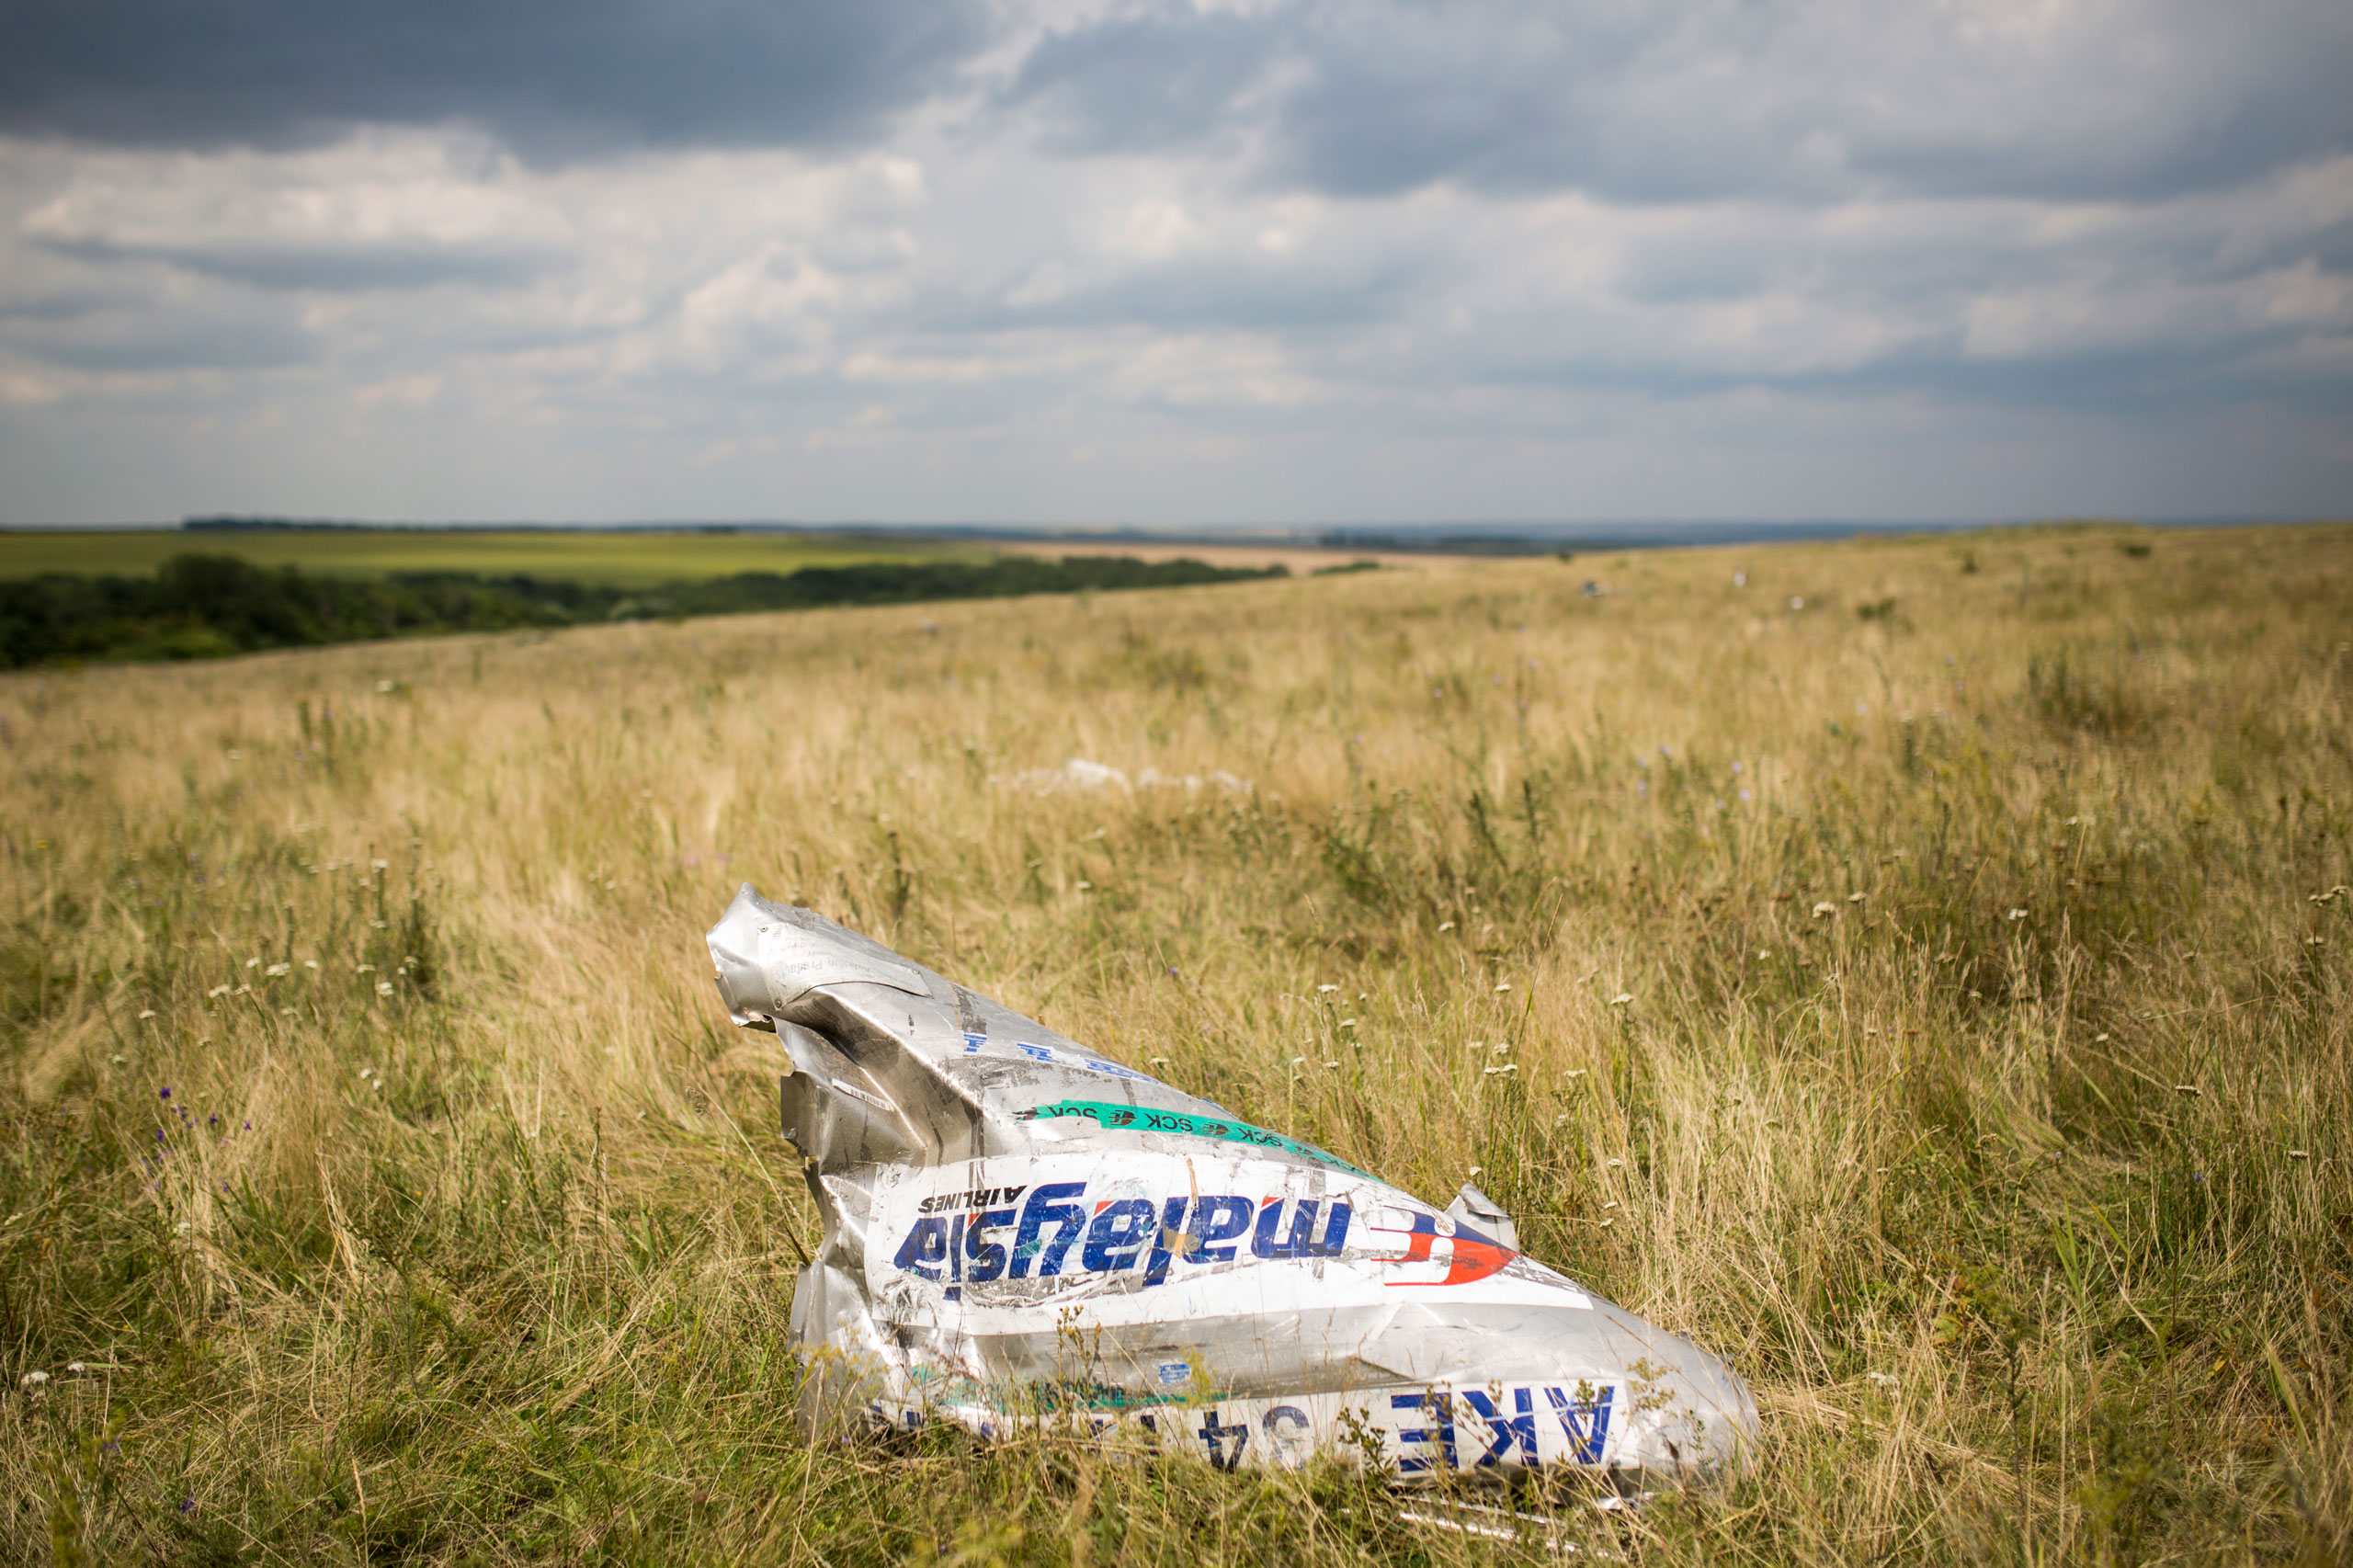 Wreckage from Malaysia Airlines flight MH17 lies in a field in Grabovo, Ukraine, on July 22, 2014 . (Rob Stothard—Getty Images)